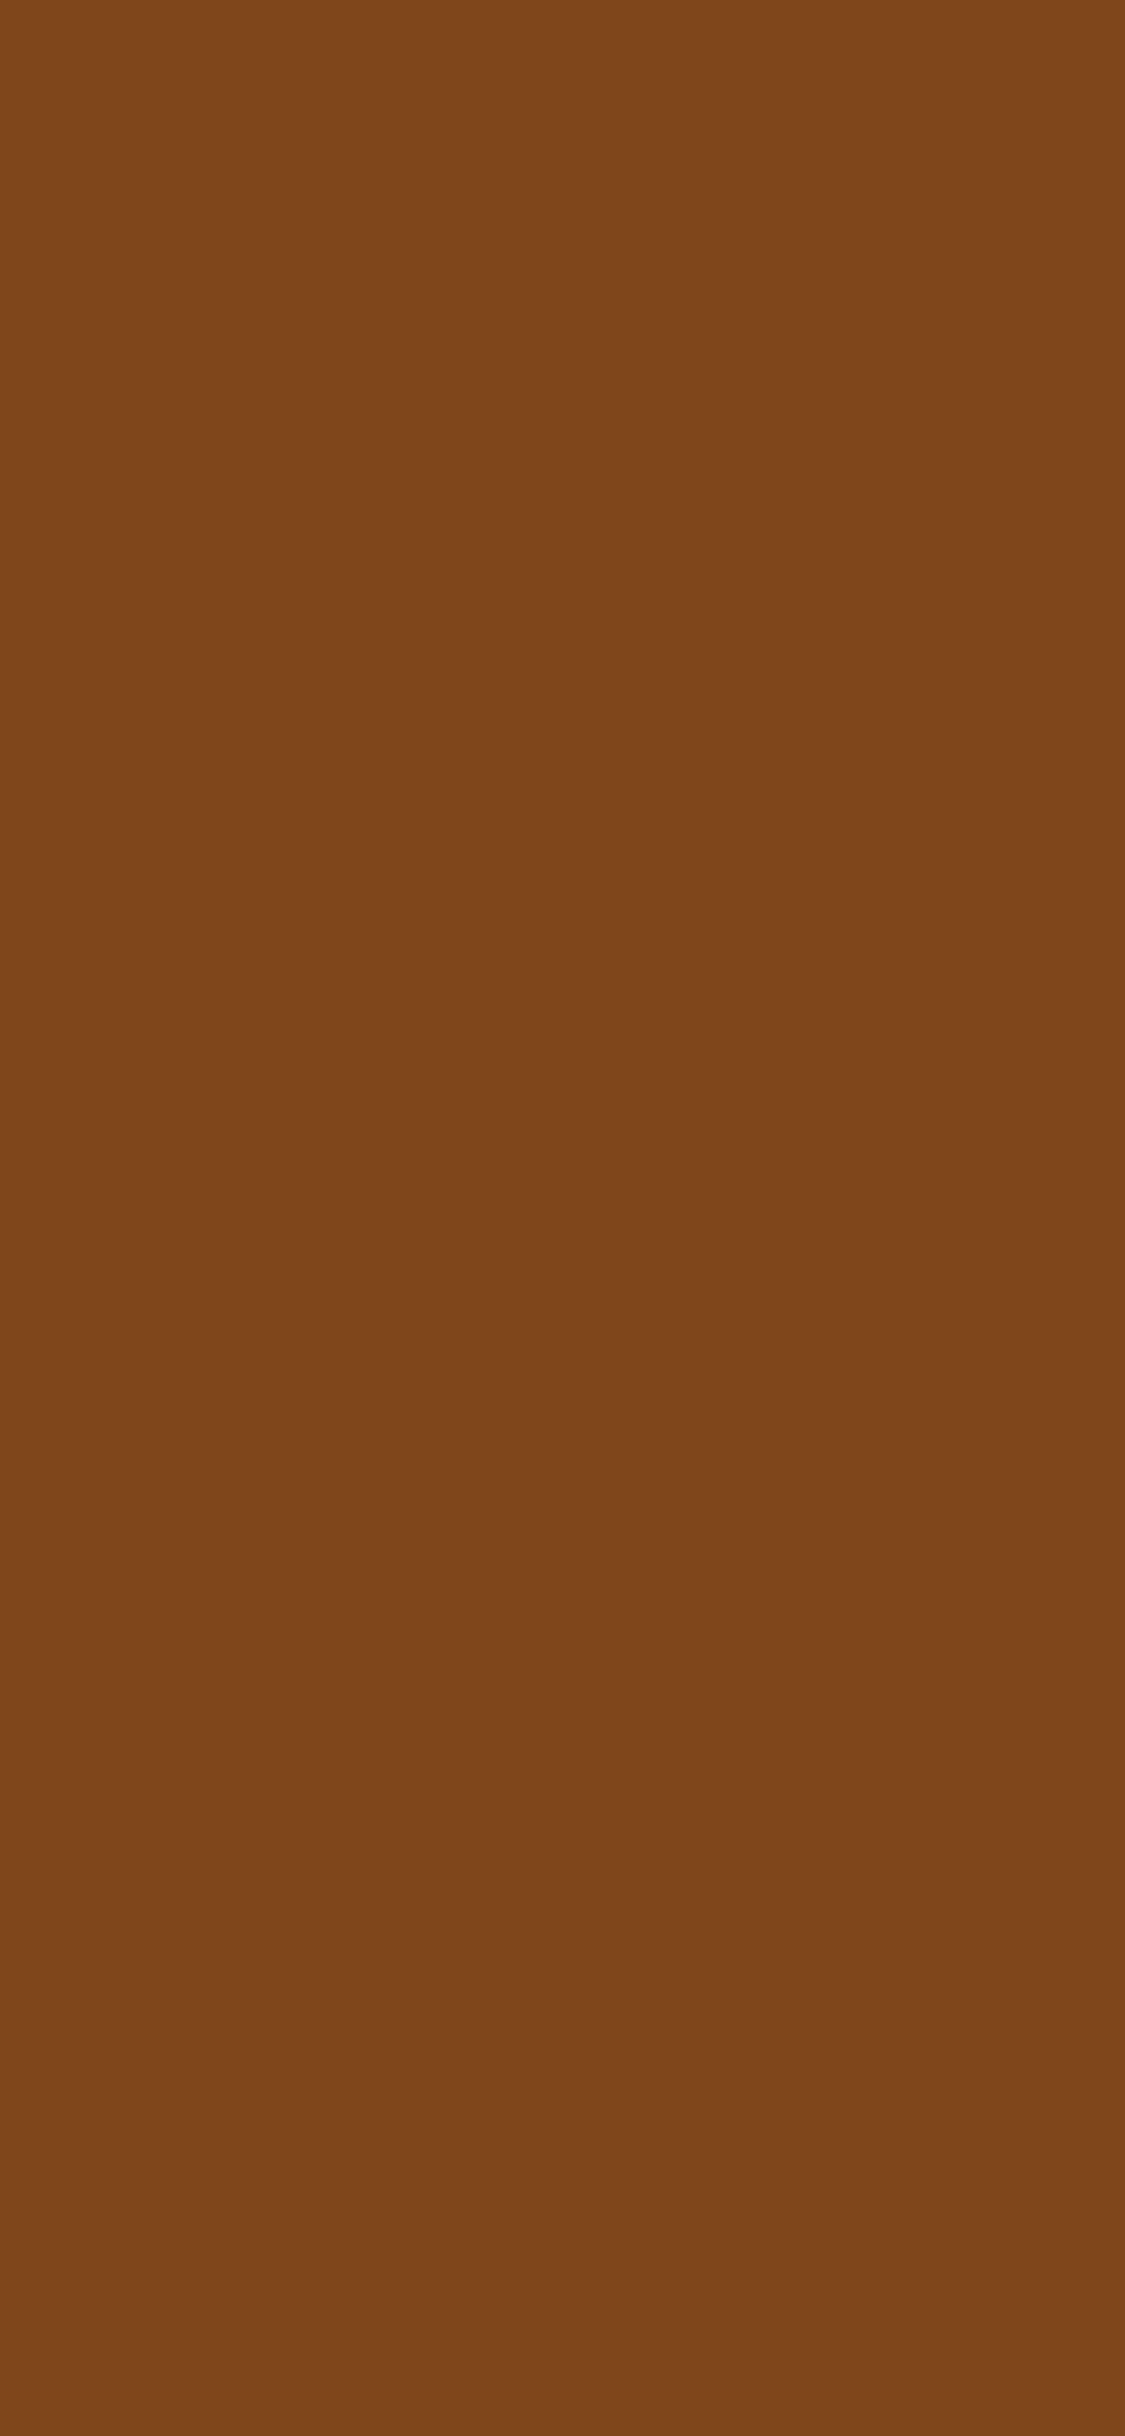 1125x2436 Russet Solid Color Background